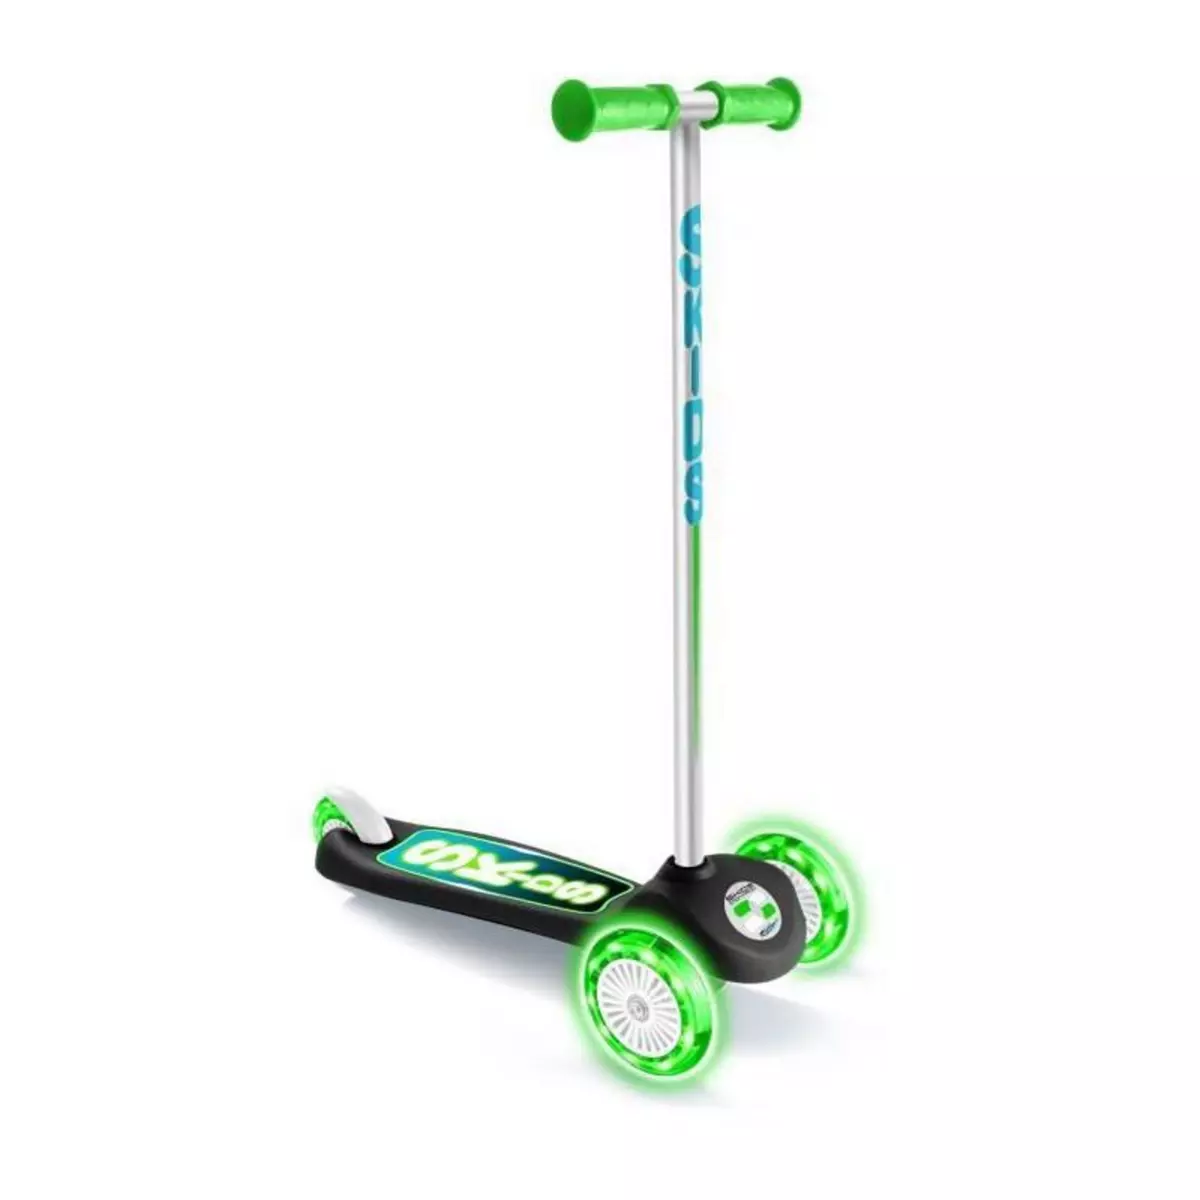 STAMP STAMP Trottinette 3 roues a balance SKIDS CONTROL roues lumineuses